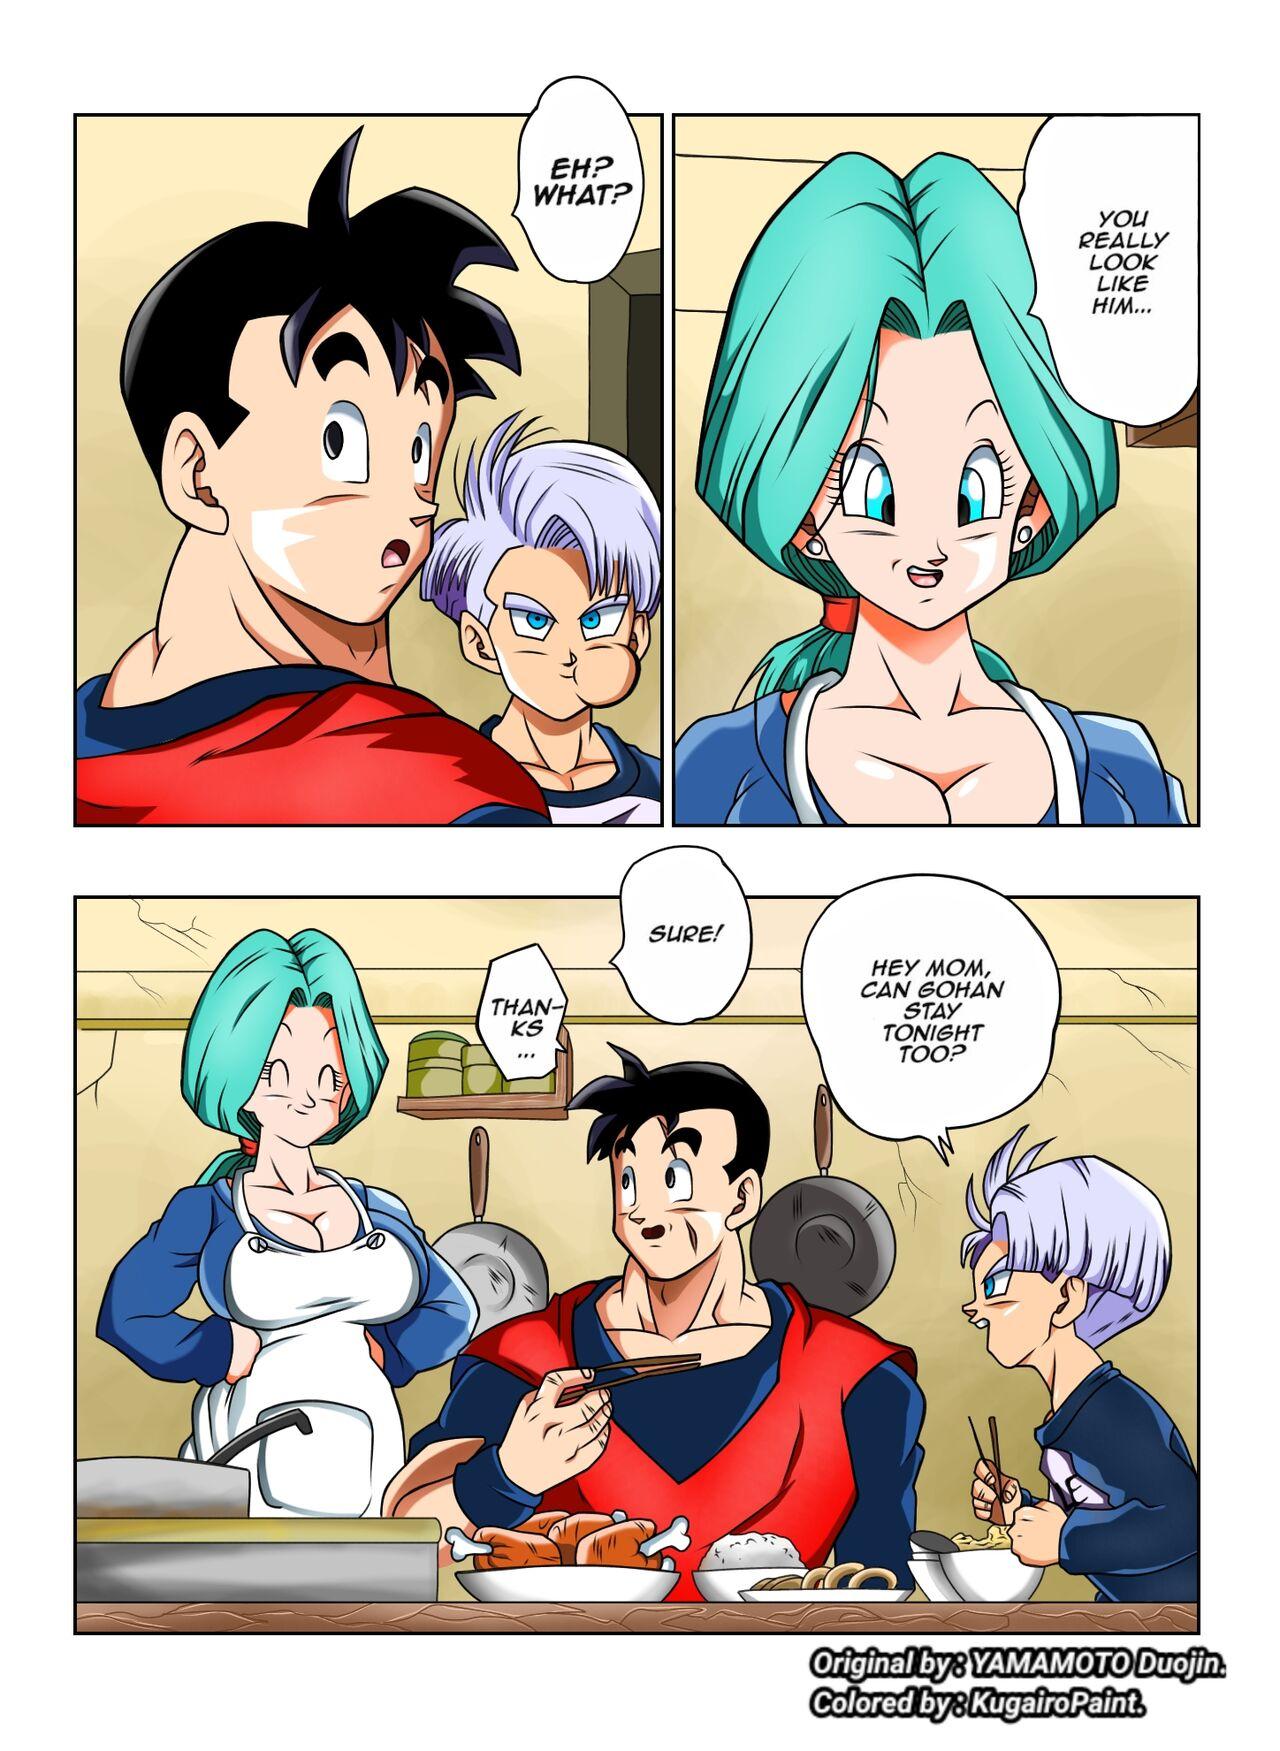 Fat Lots of Sex in this Future!! - Dragon ball z Lovers - Picture 3